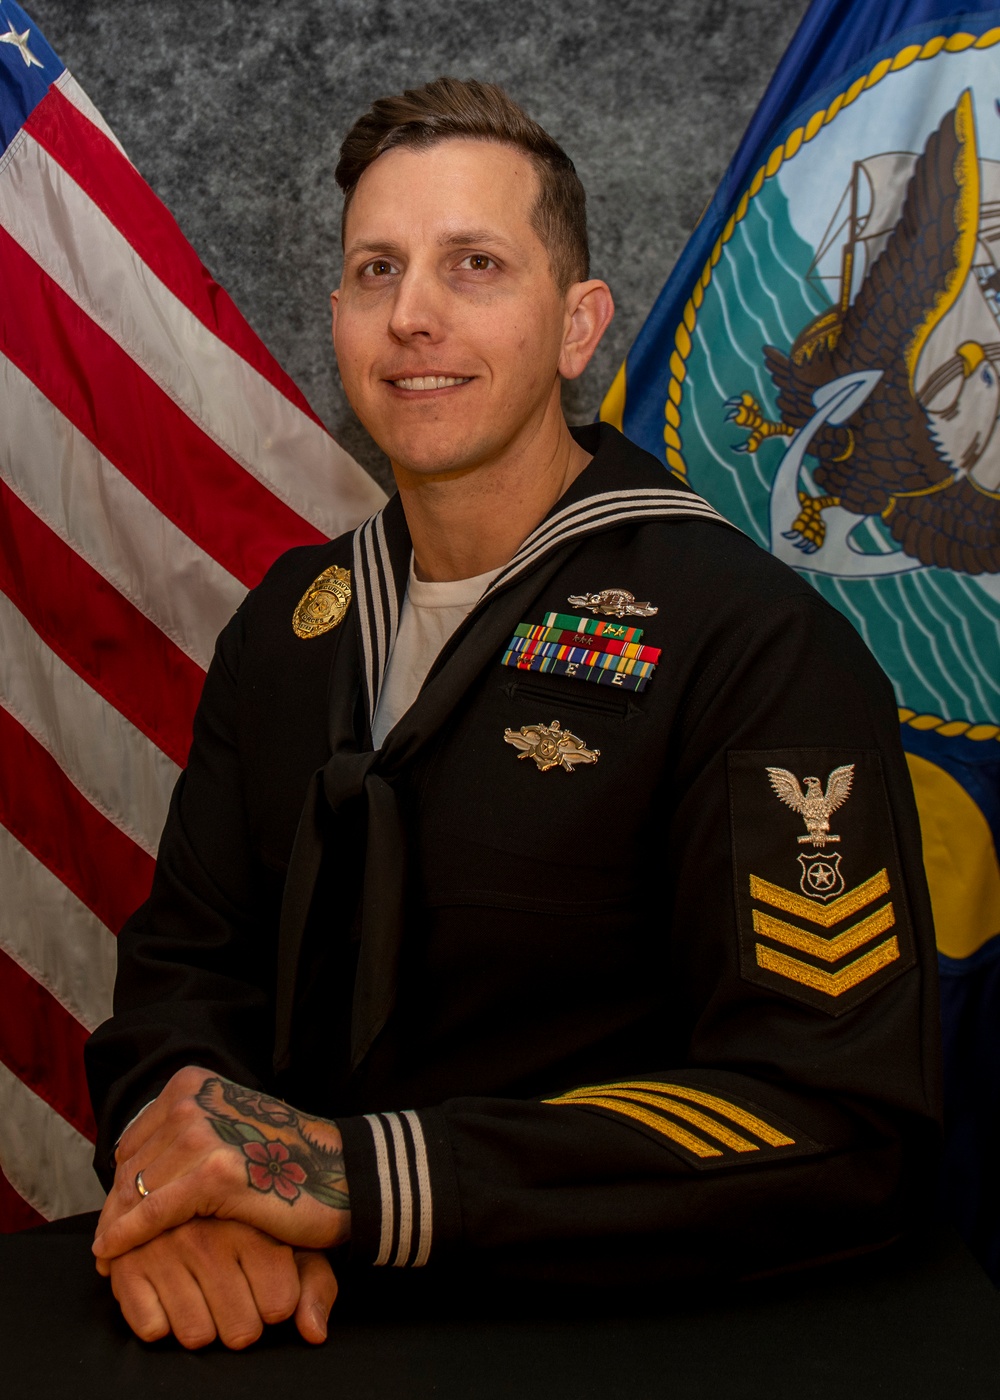 NSGL Sailor of the Year - Master-at-Arms 1st Class Michael Bowers